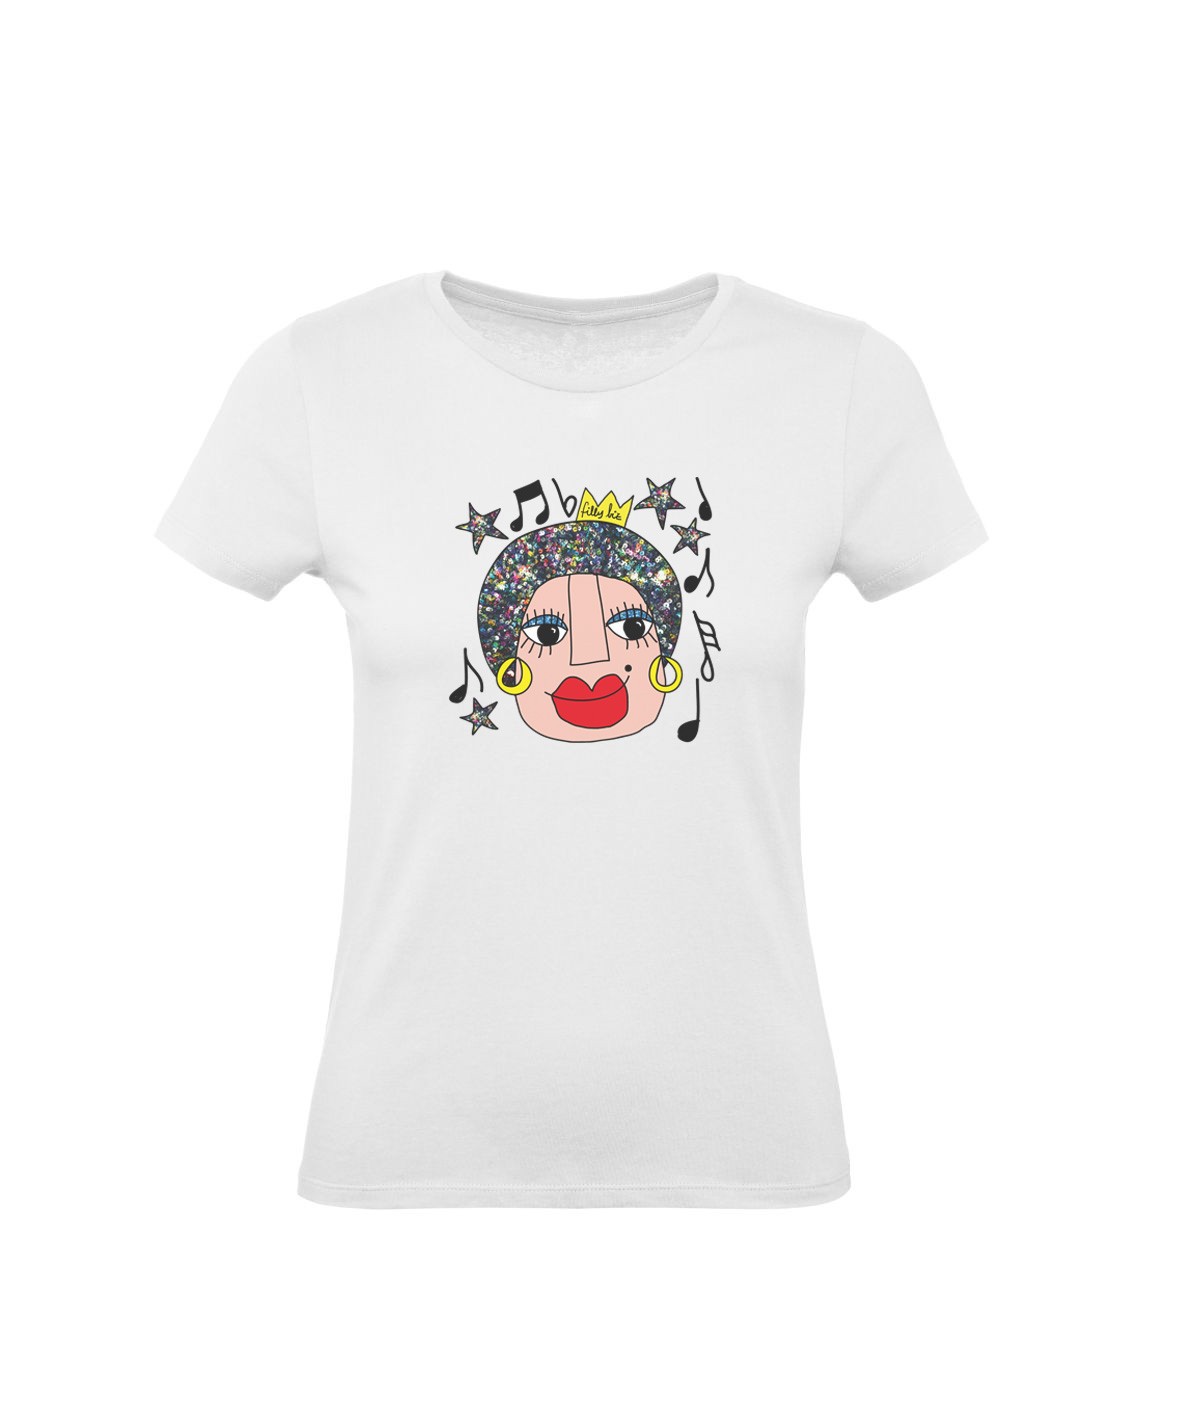 Party girl ● printed t-shirt